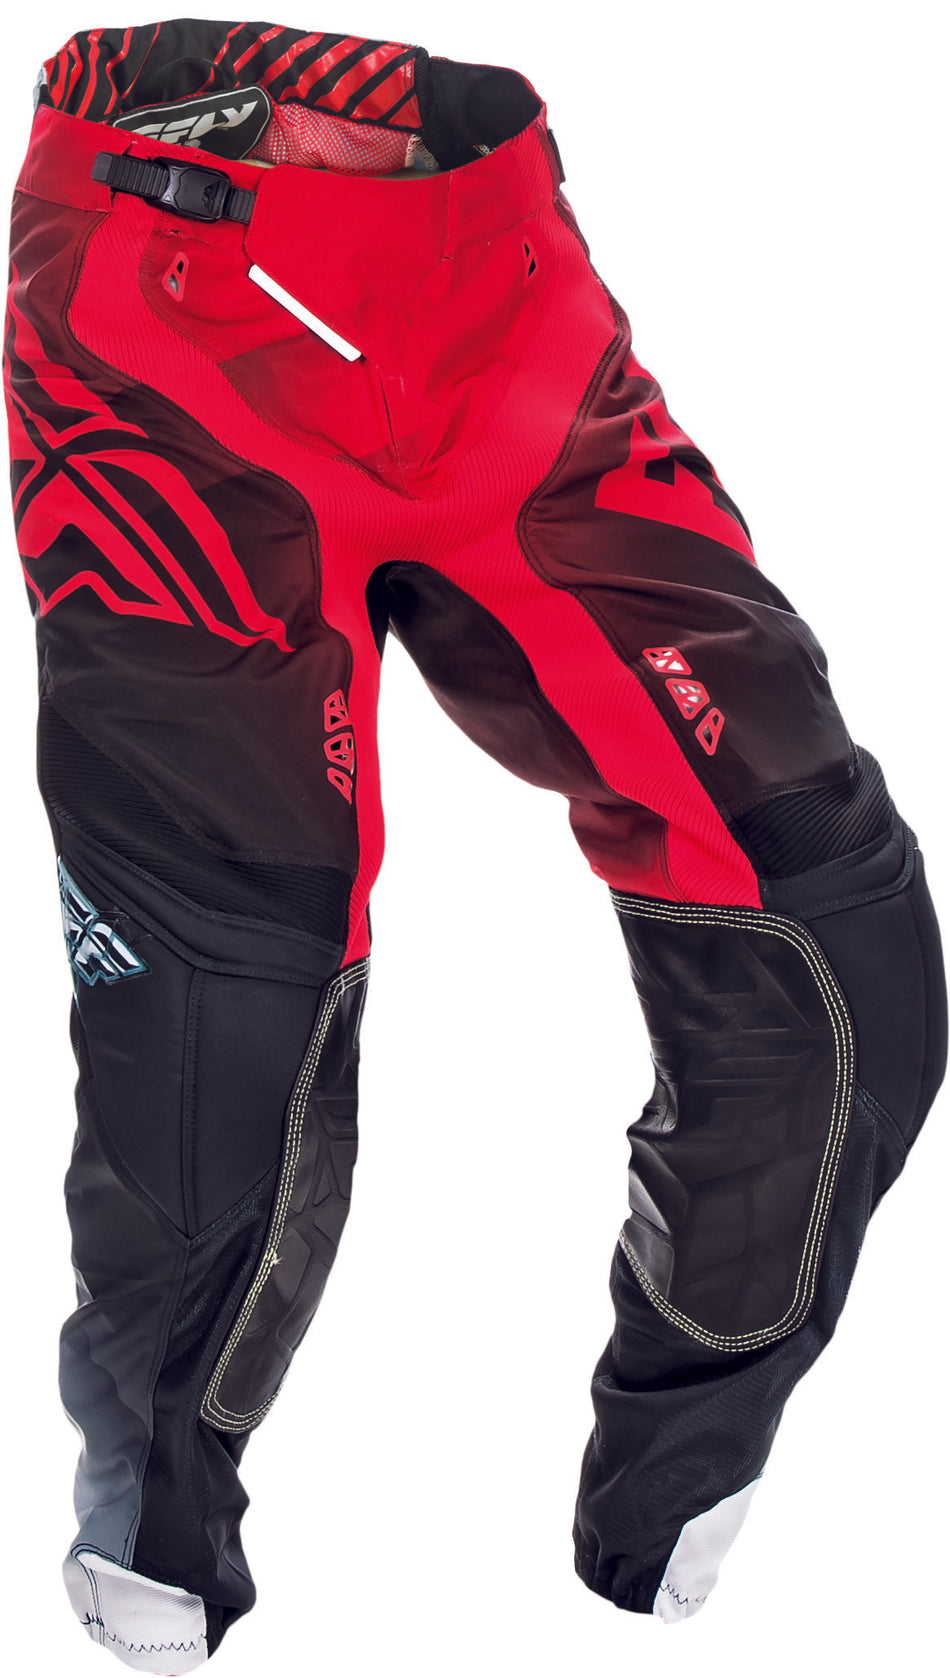 FLY RACING Lite Hydrogen Pant Red/Black/White Sz 28s 370-73228S